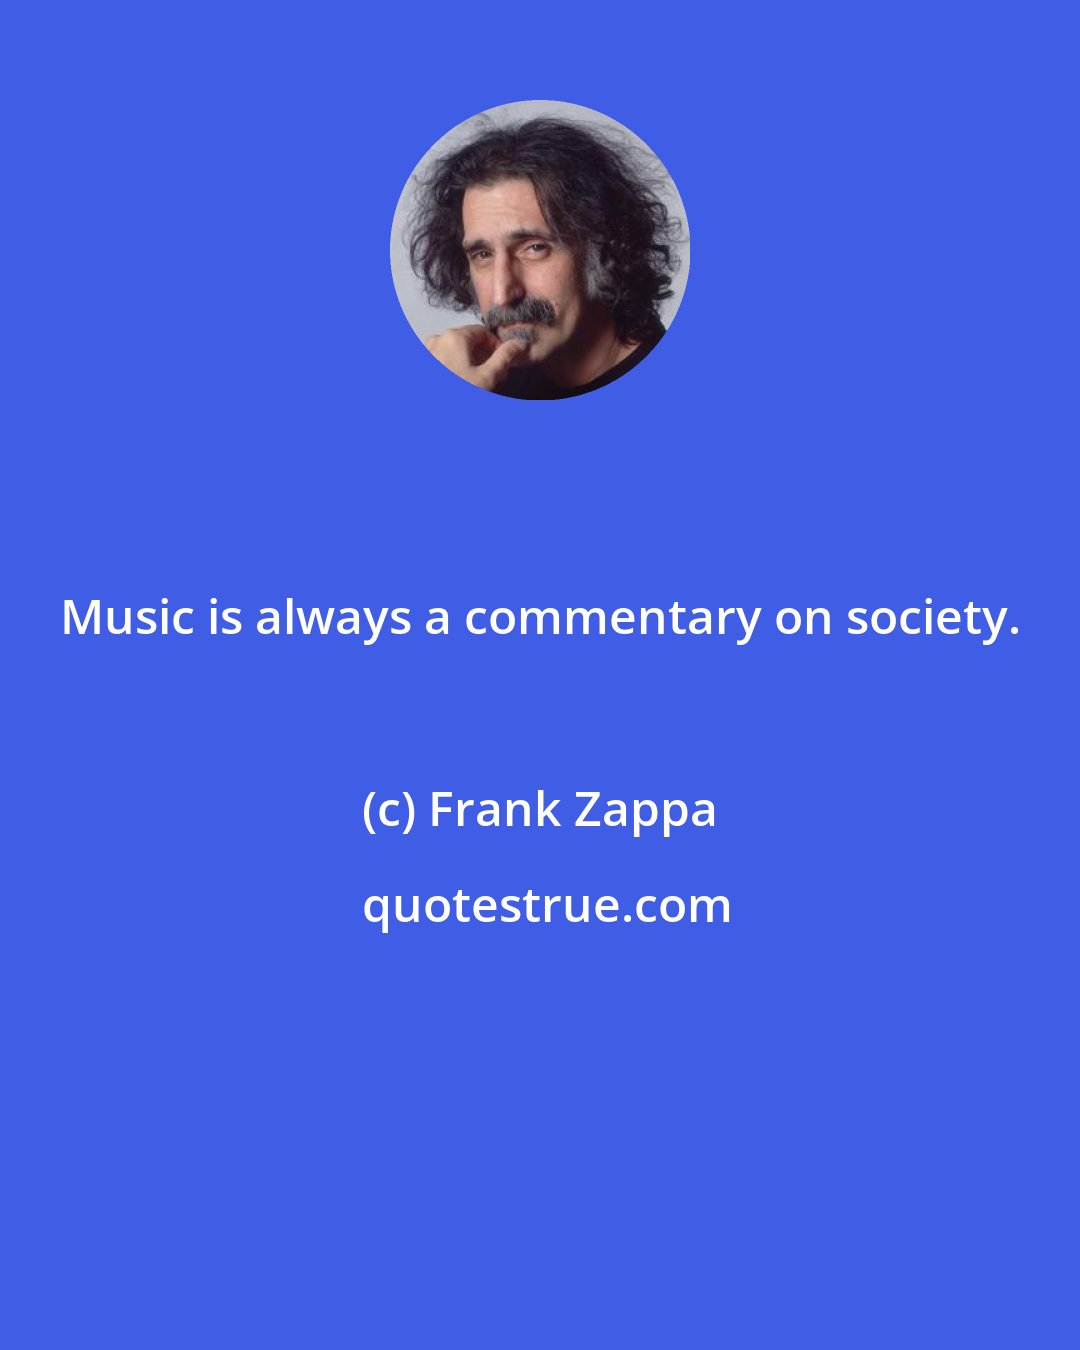 Frank Zappa: Music is always a commentary on society.